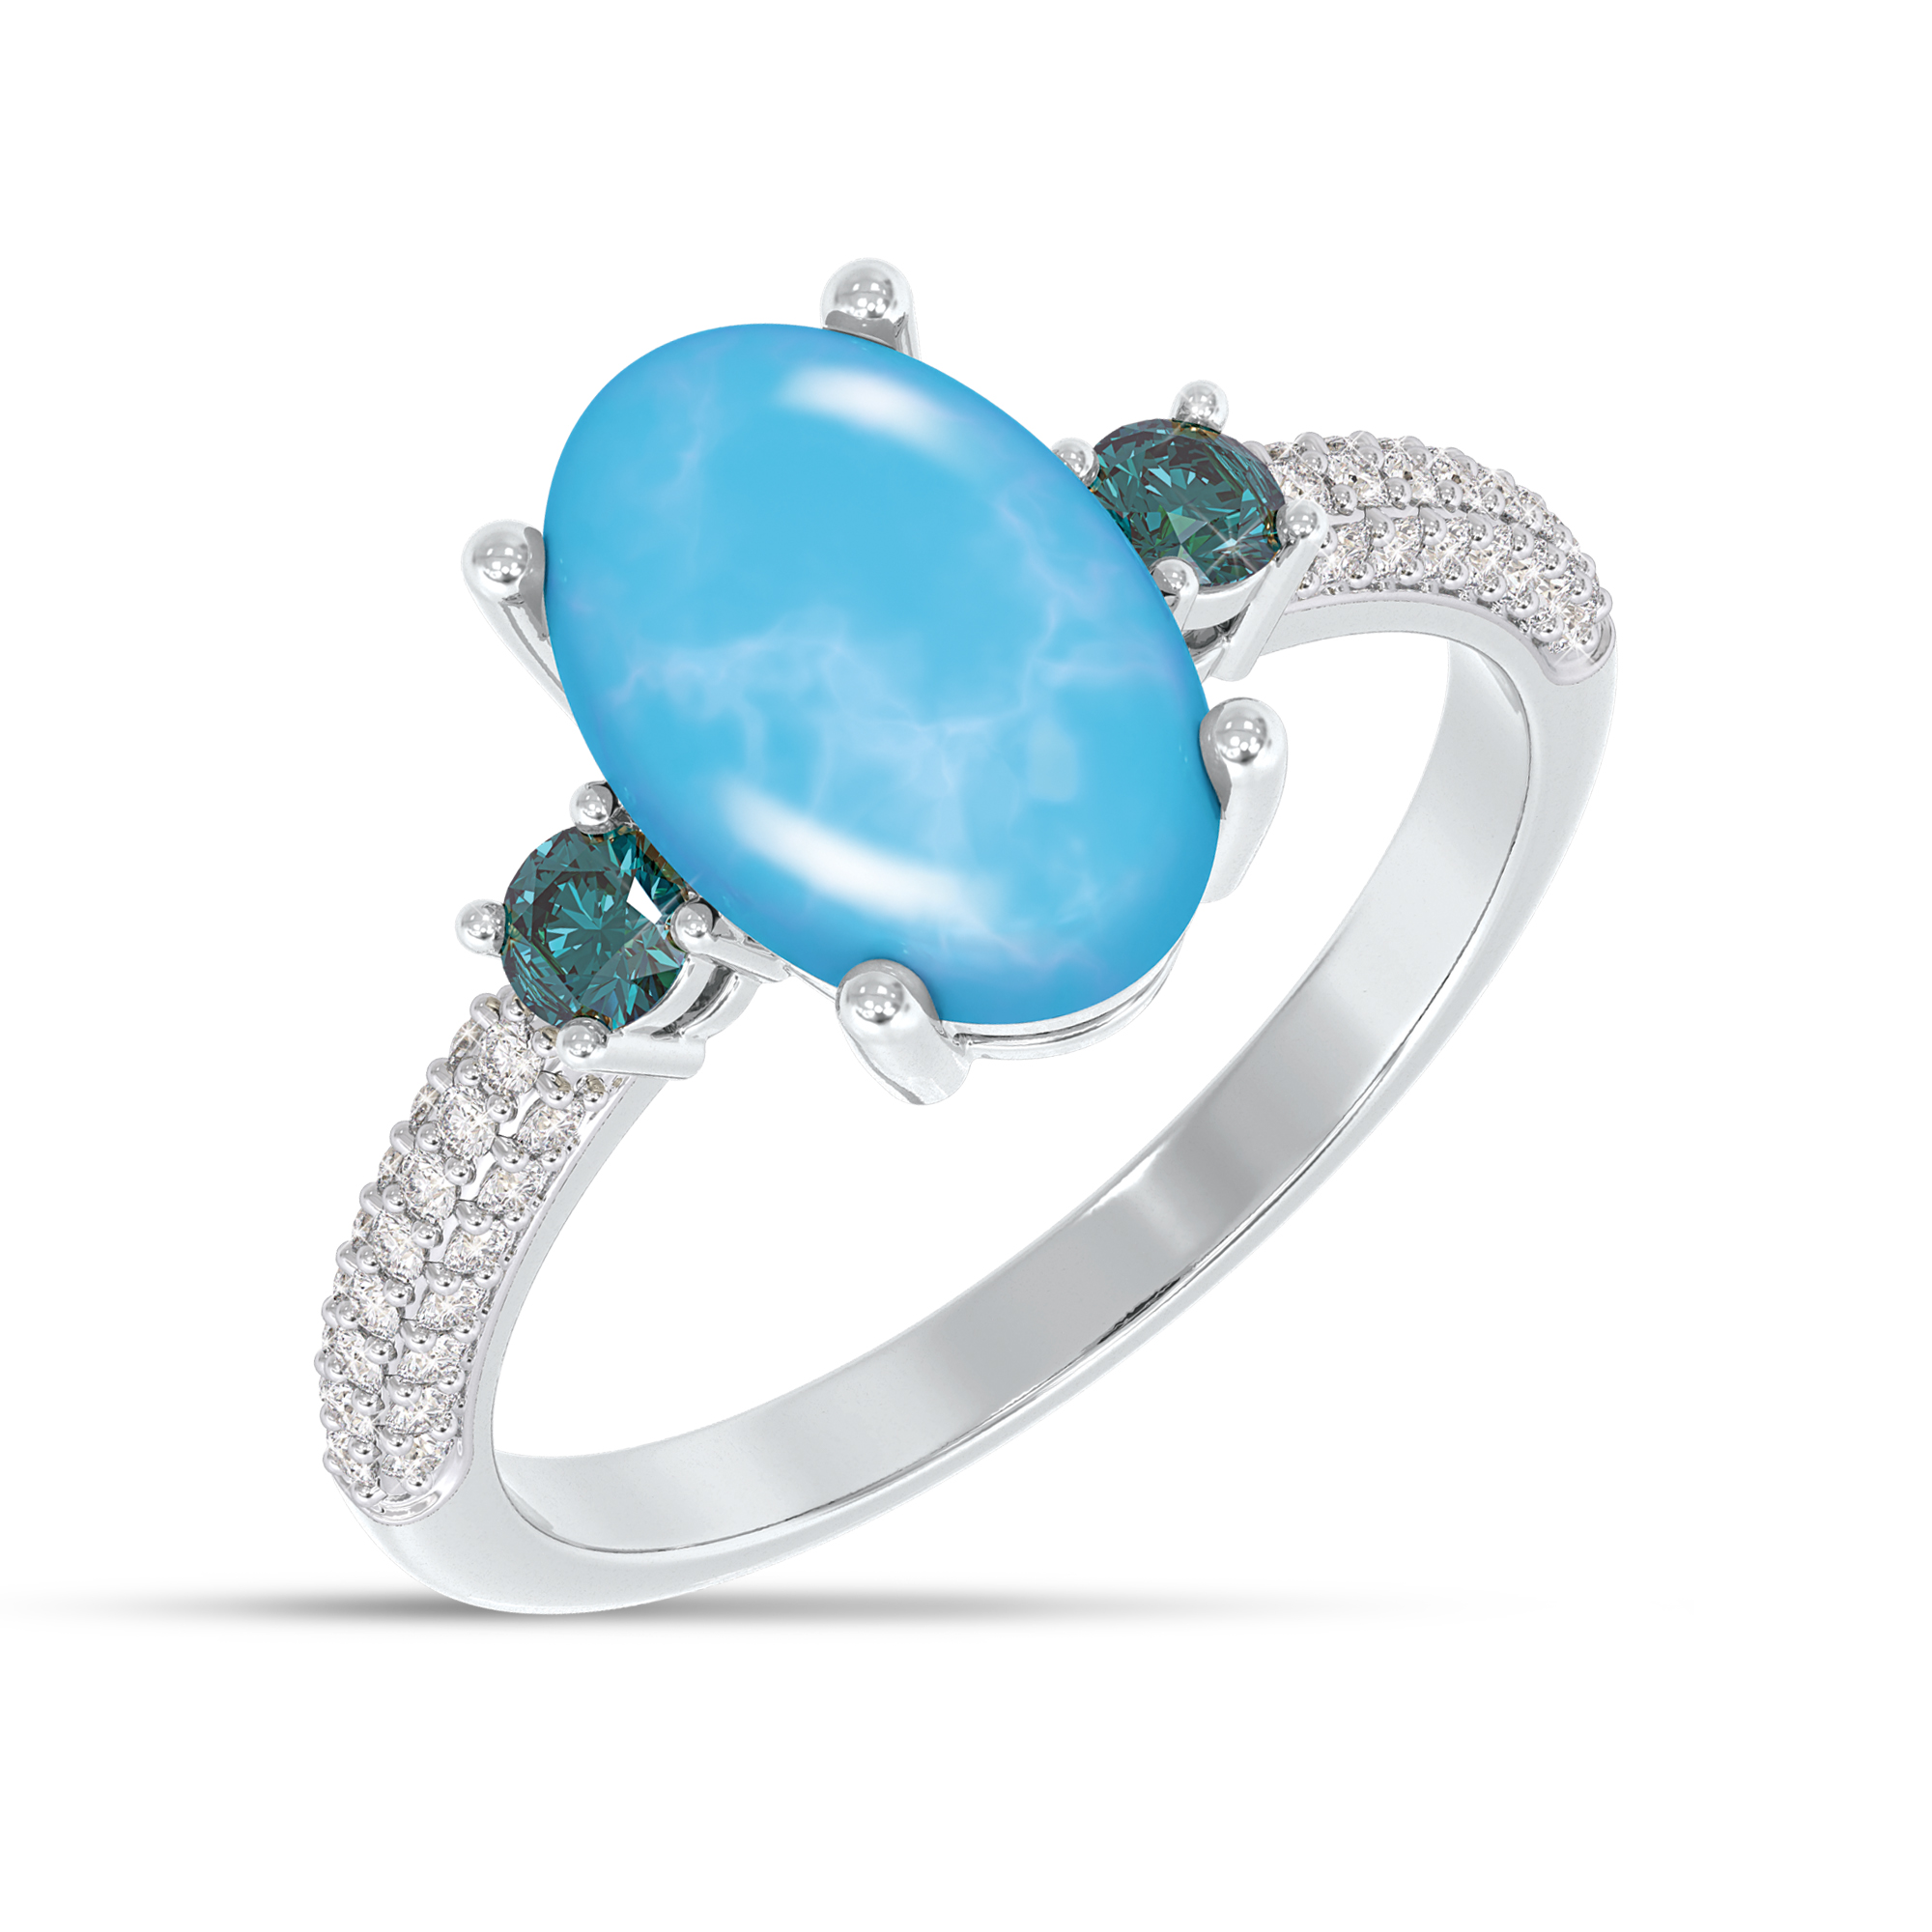 7 12 Ring Size|Beautiful Larimar Ring|Sterling silver Larimar Ring|beach and tropical ring